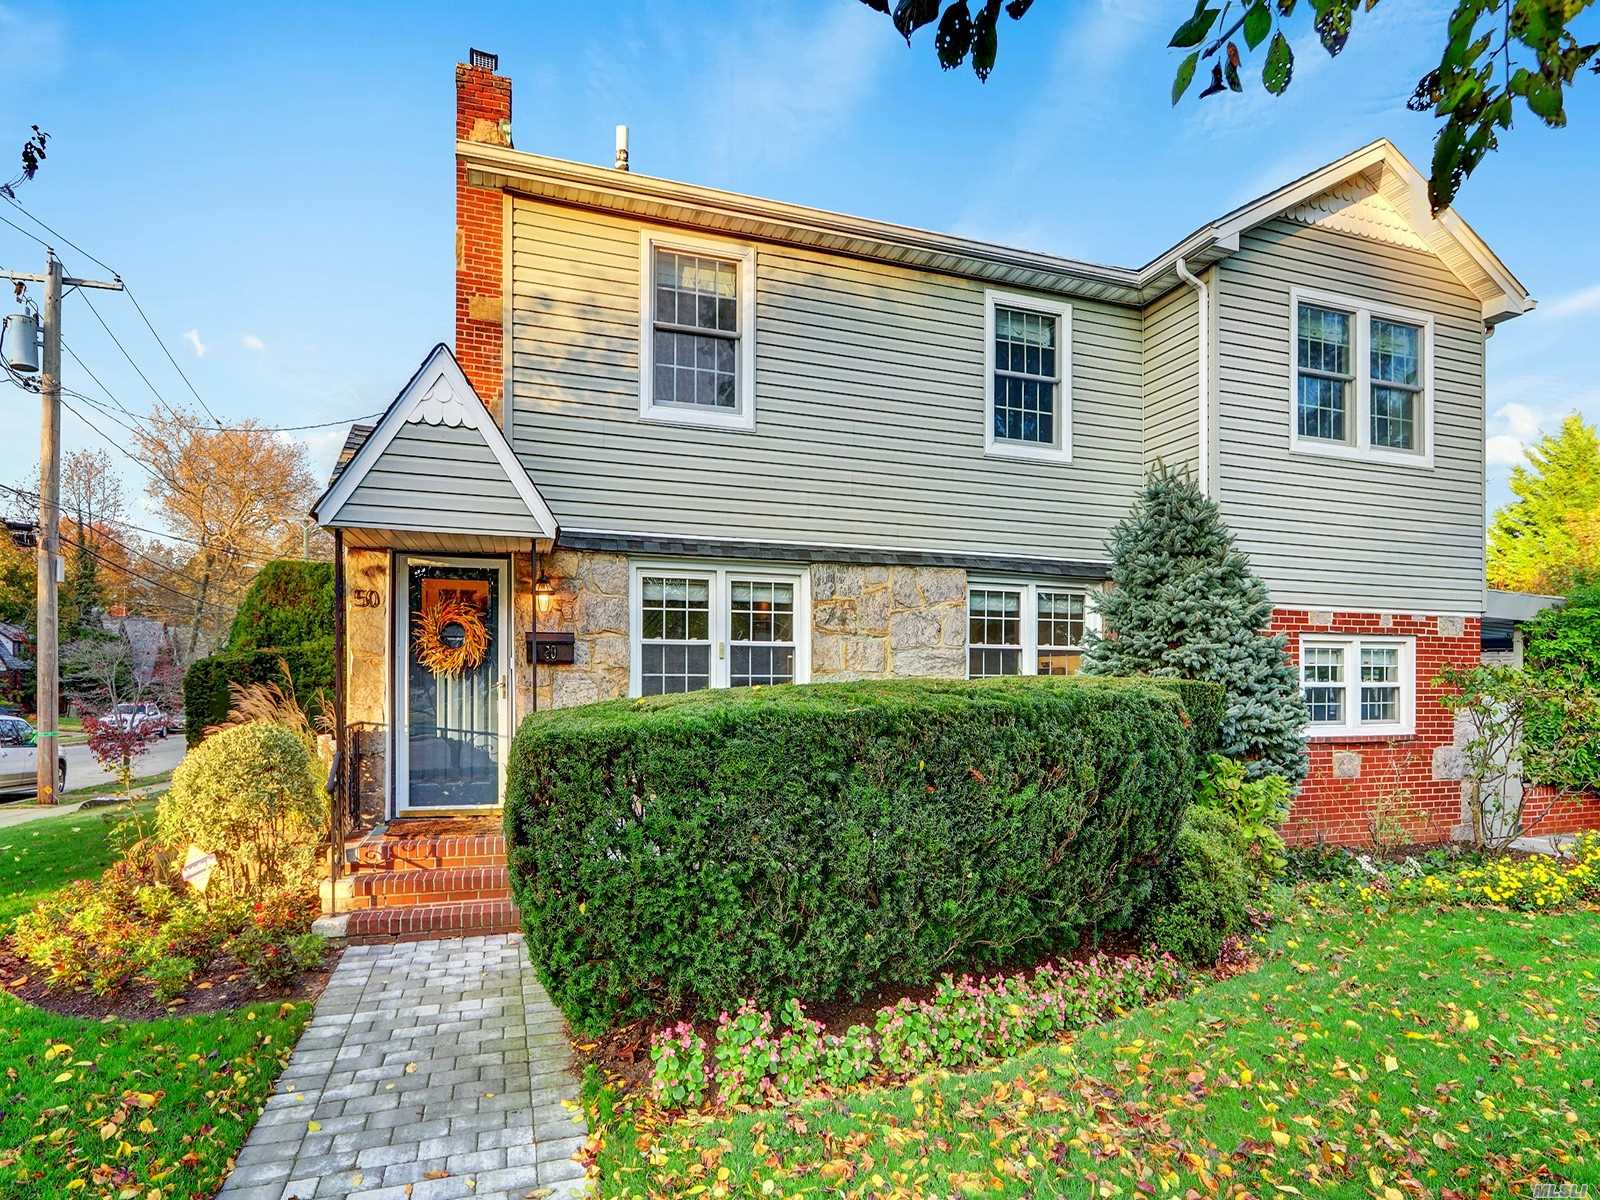 Unbelievable Opportunity to own a Stunning, Open Concept, Completely Renovated Colonial on 60x100 in Floral Park. Gleaming Hardwood floors, Top of the Line Appliances & Gorgeous Finishes throughout. 4 Bdrms, 3 Full Baths, Large Master Suite w/ WIC. Office, EIK w/ Wolfe Appliances, Sub-zero Refrigerator, Carrara Marble Counter-tops, Walk-in Pantry. Beautiful Living Rm/Dining Rm Combo, Huge Family Rm, Finished Basement and Inviting Outdoor Living Space. All New CAC, Heating, Windows, Siding, Roof, Generator